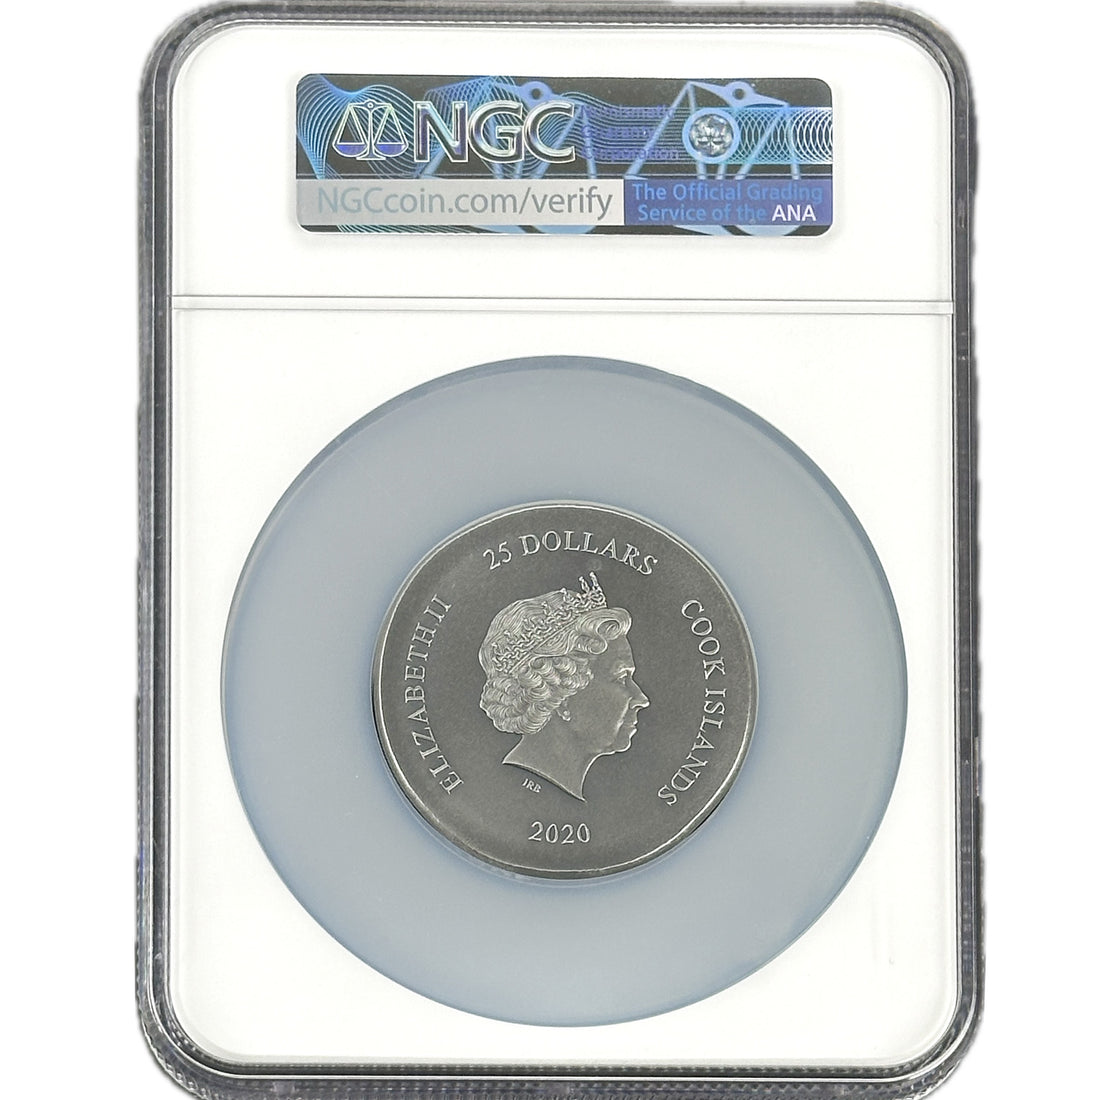 2020 5 oz TORTOISE Silver Coin MS 70 $25 - Cook Islands - OZB